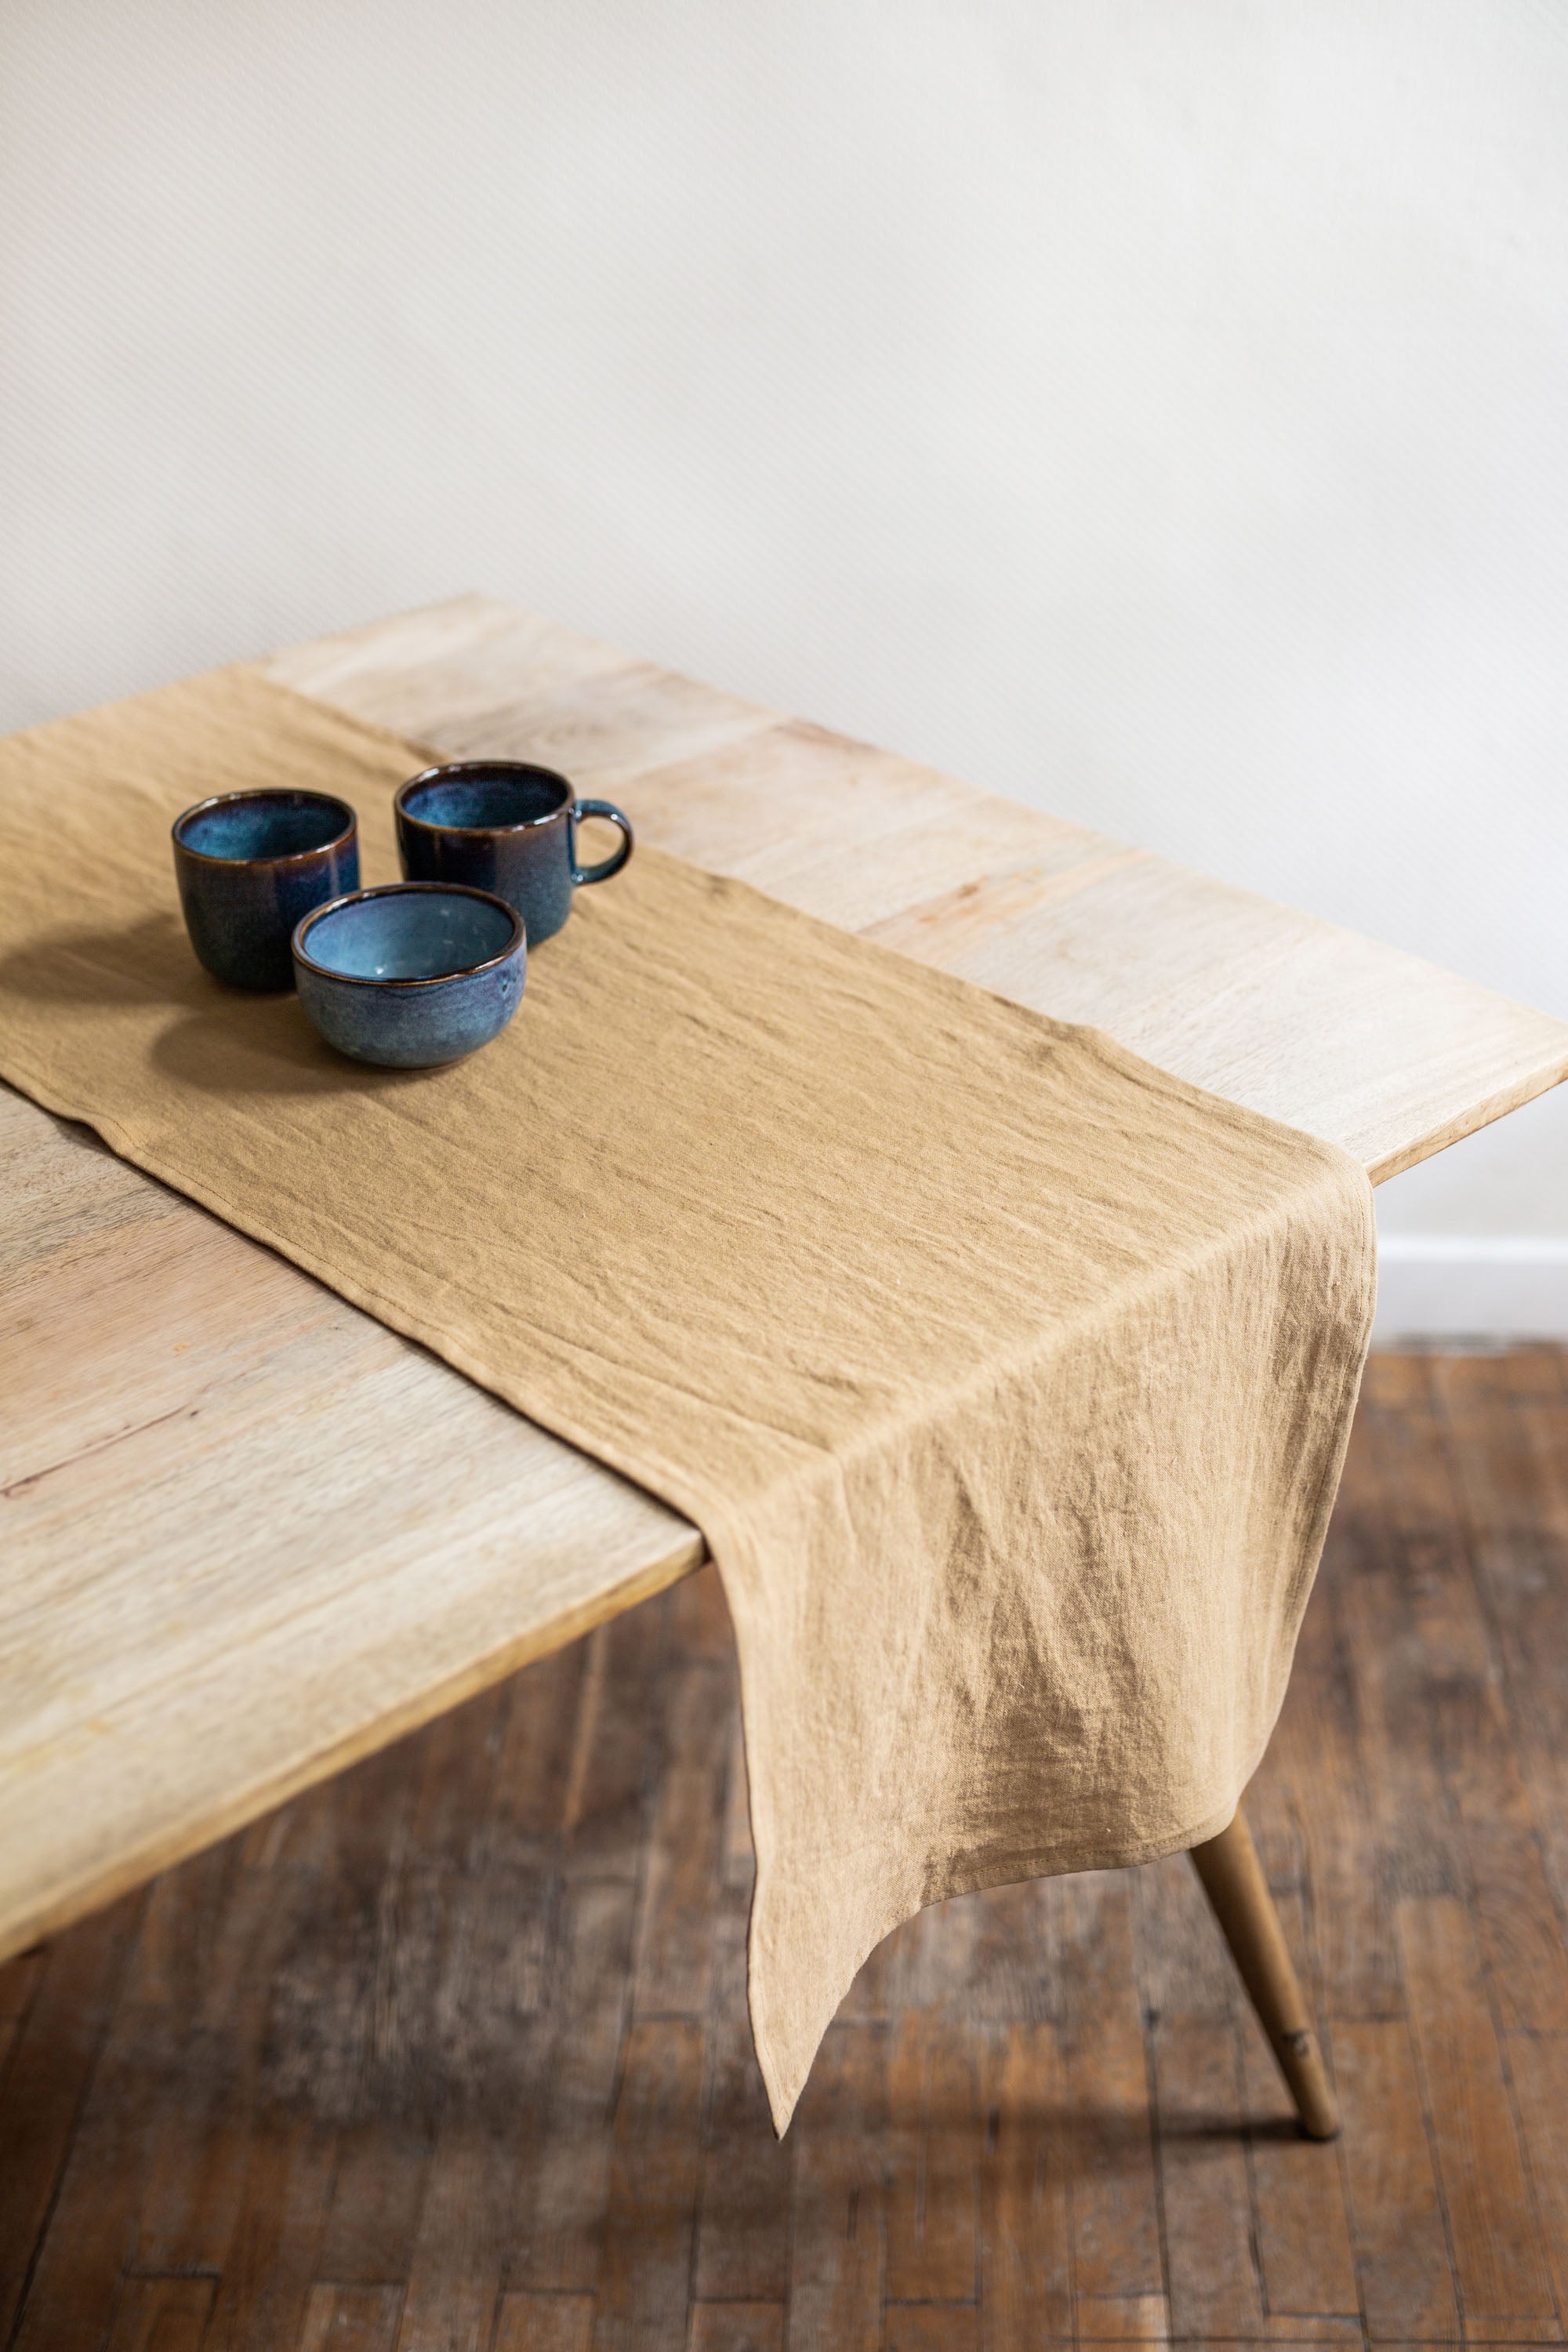 Rustic Dinner Table With Mustard Linen Table Runner By AmourlInen